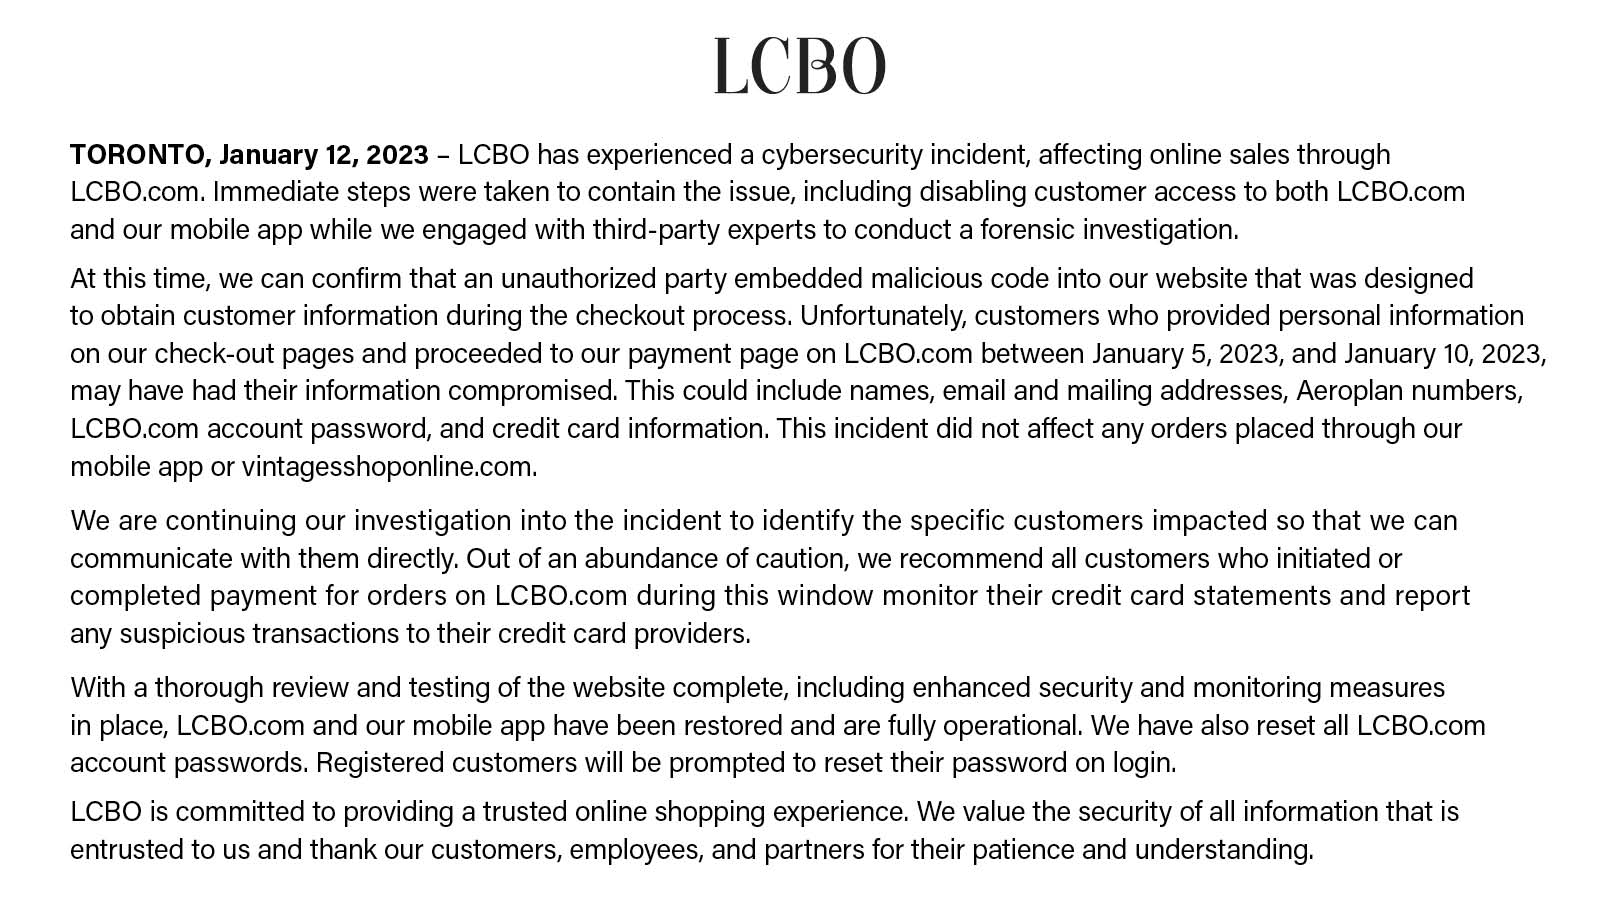 LCBO cyber incident statement